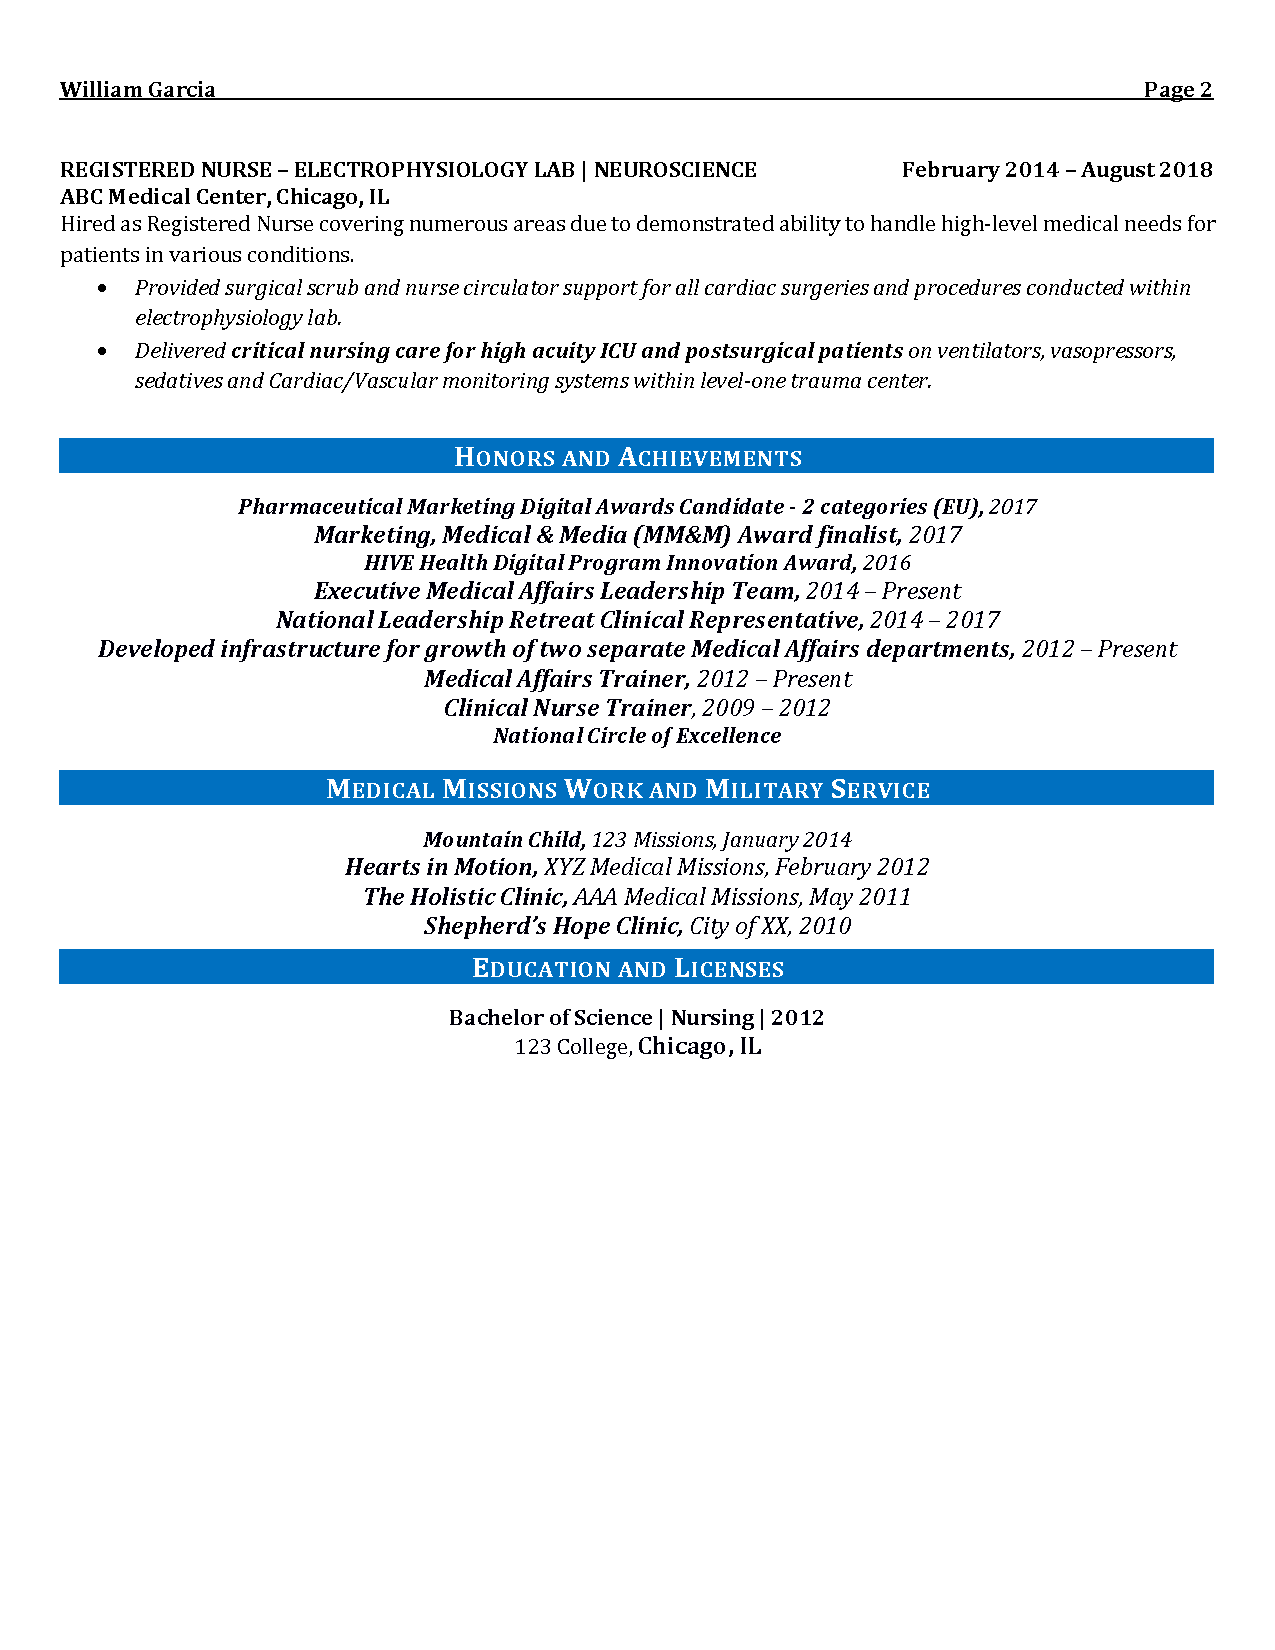 00007 medical director resume example Page 2